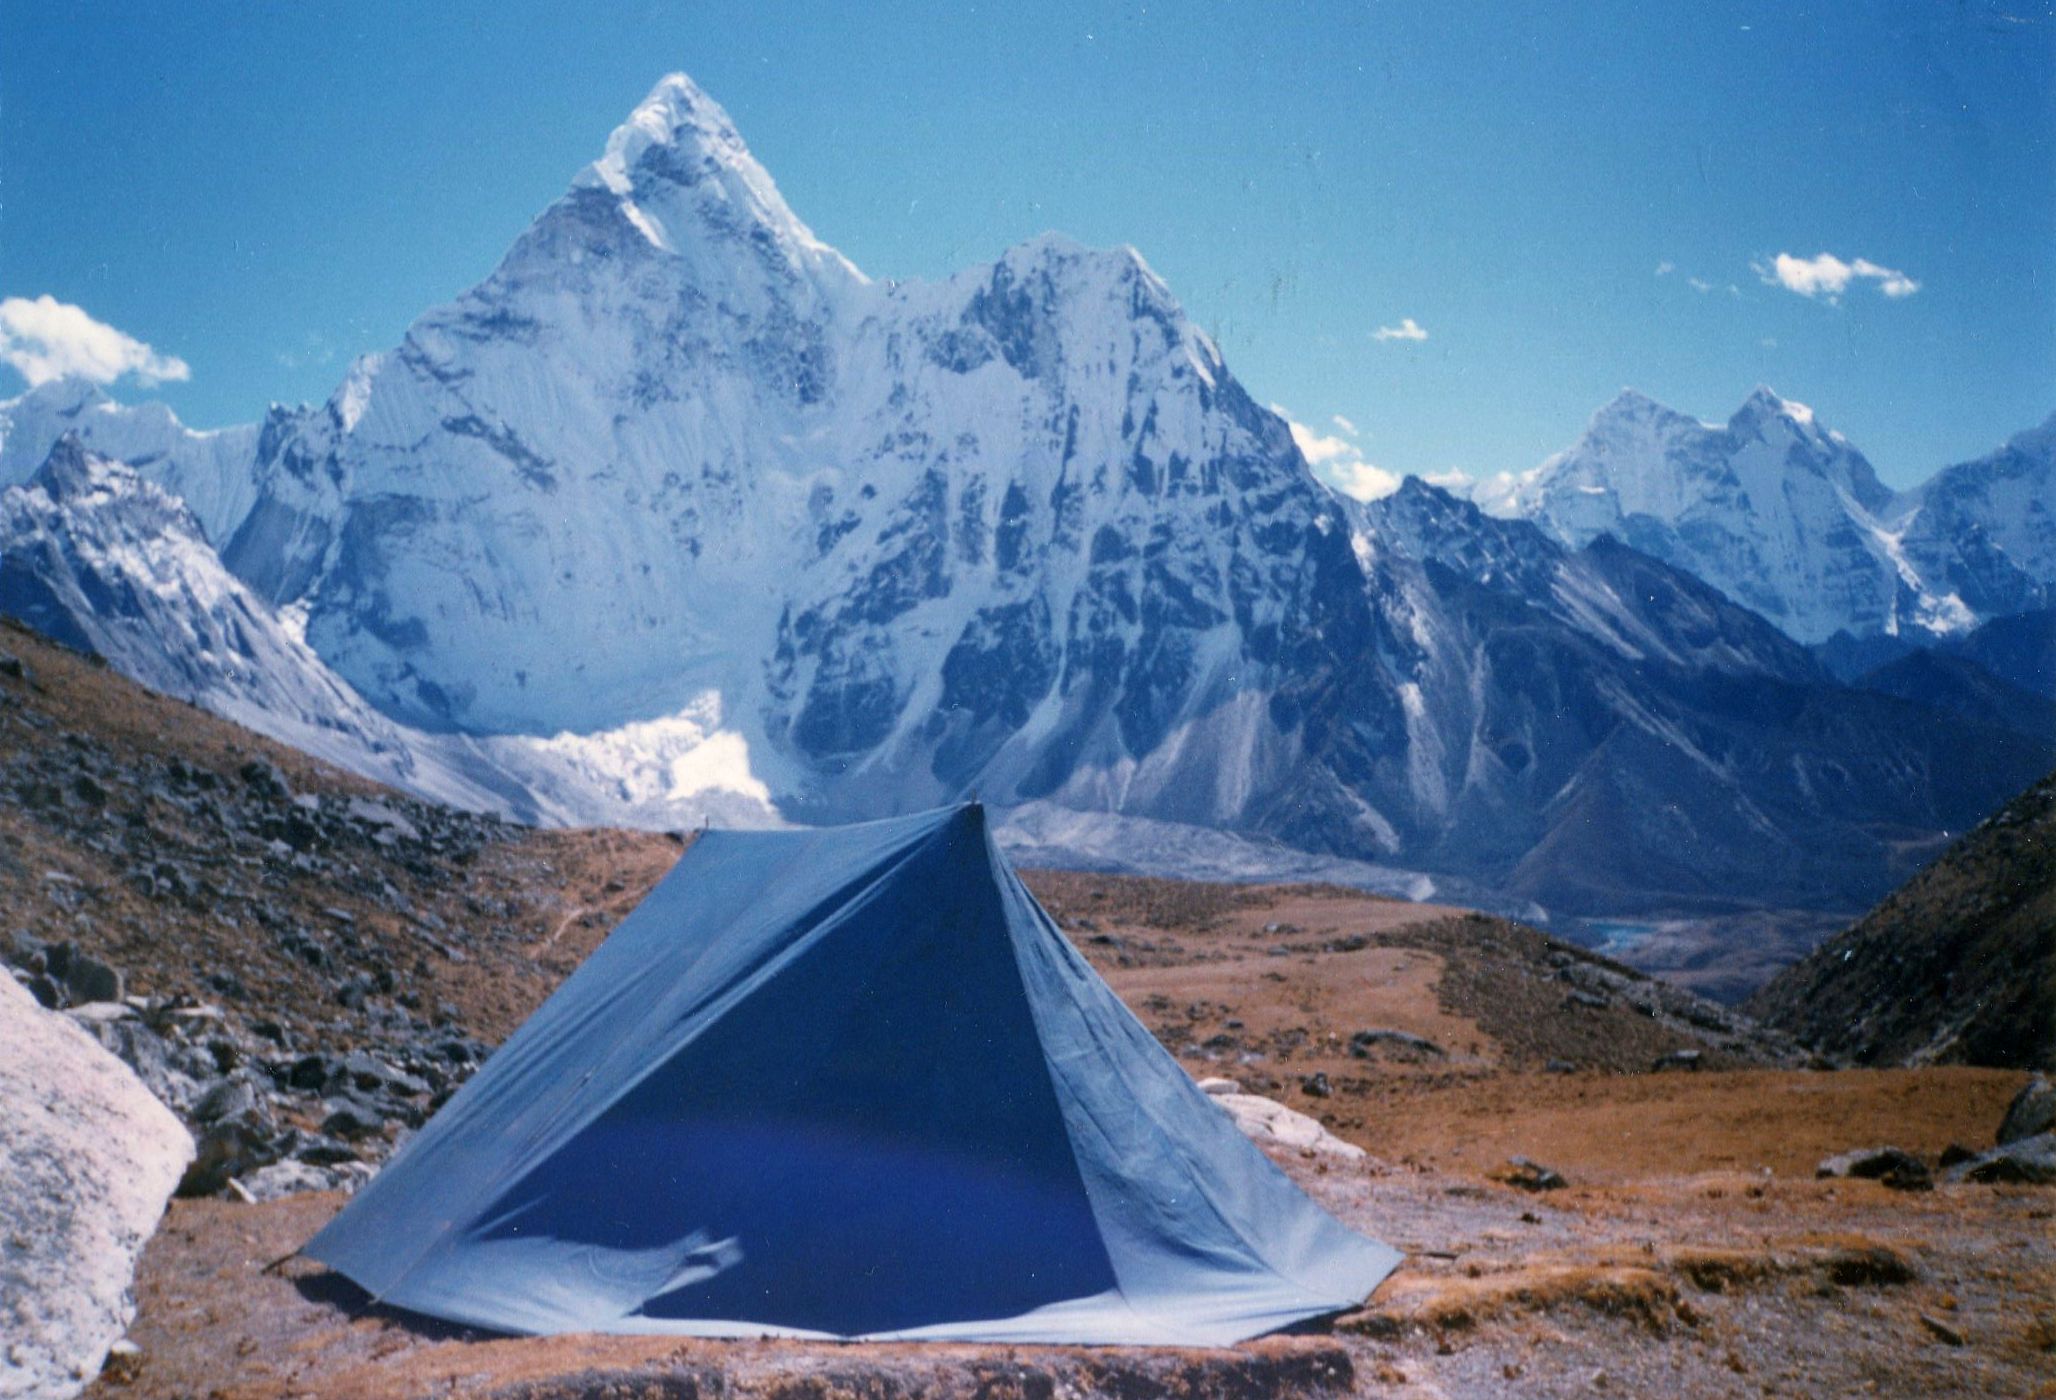 Ama Dablam above the Chhukung Valley